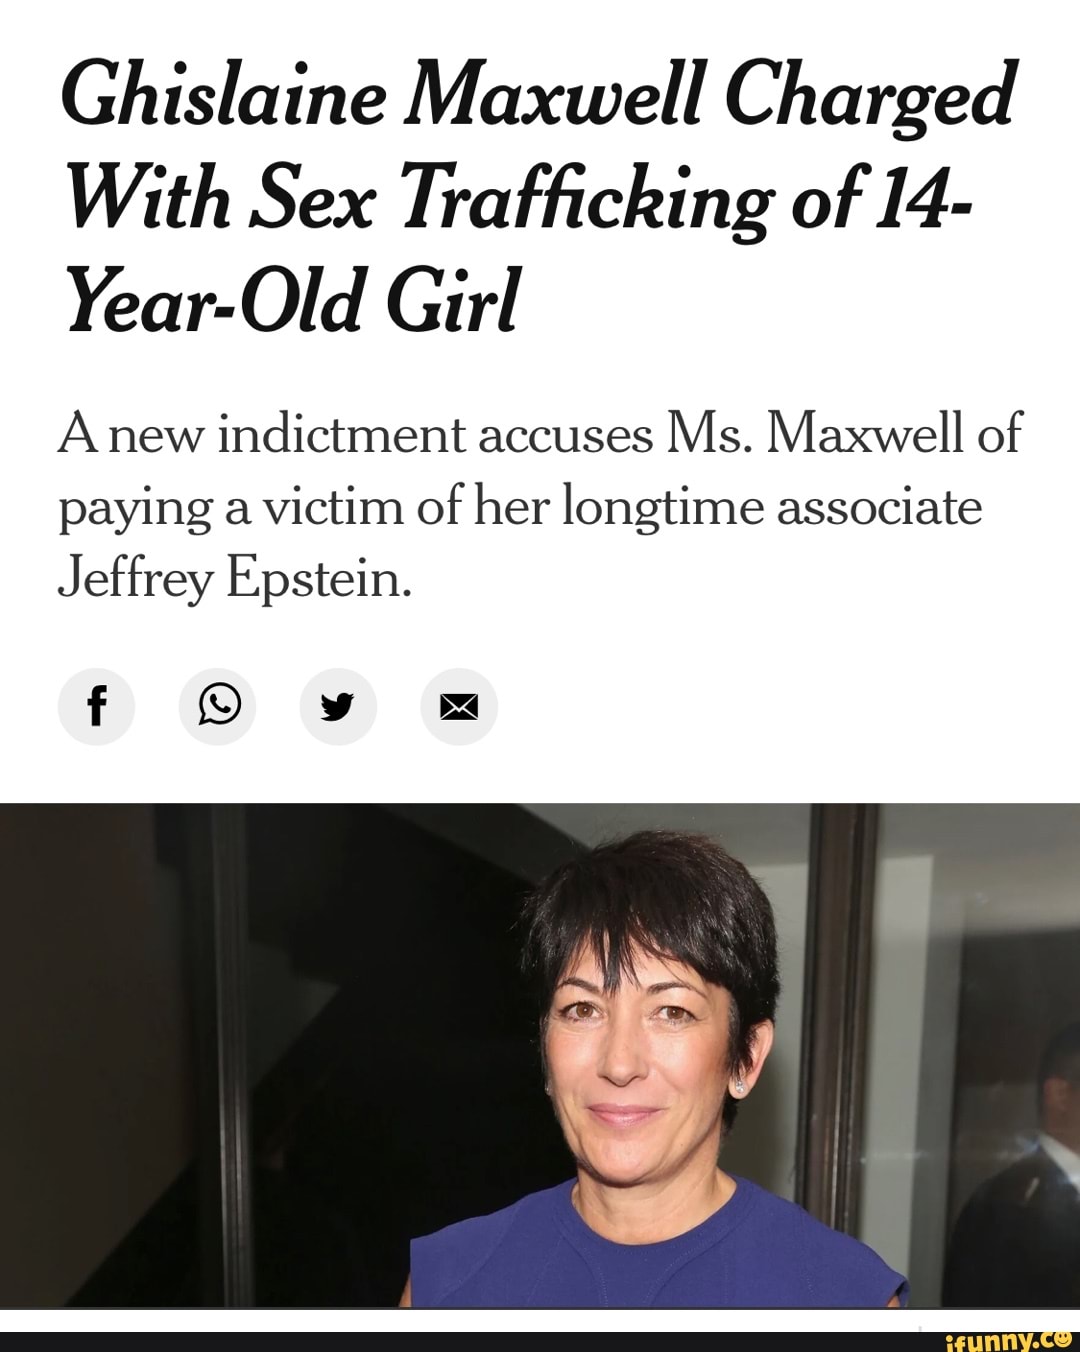 Ghislaine Maxwell Charged With Sex Trafficking Of 14 Year Old Girl Anew Indictment Accuses Ms